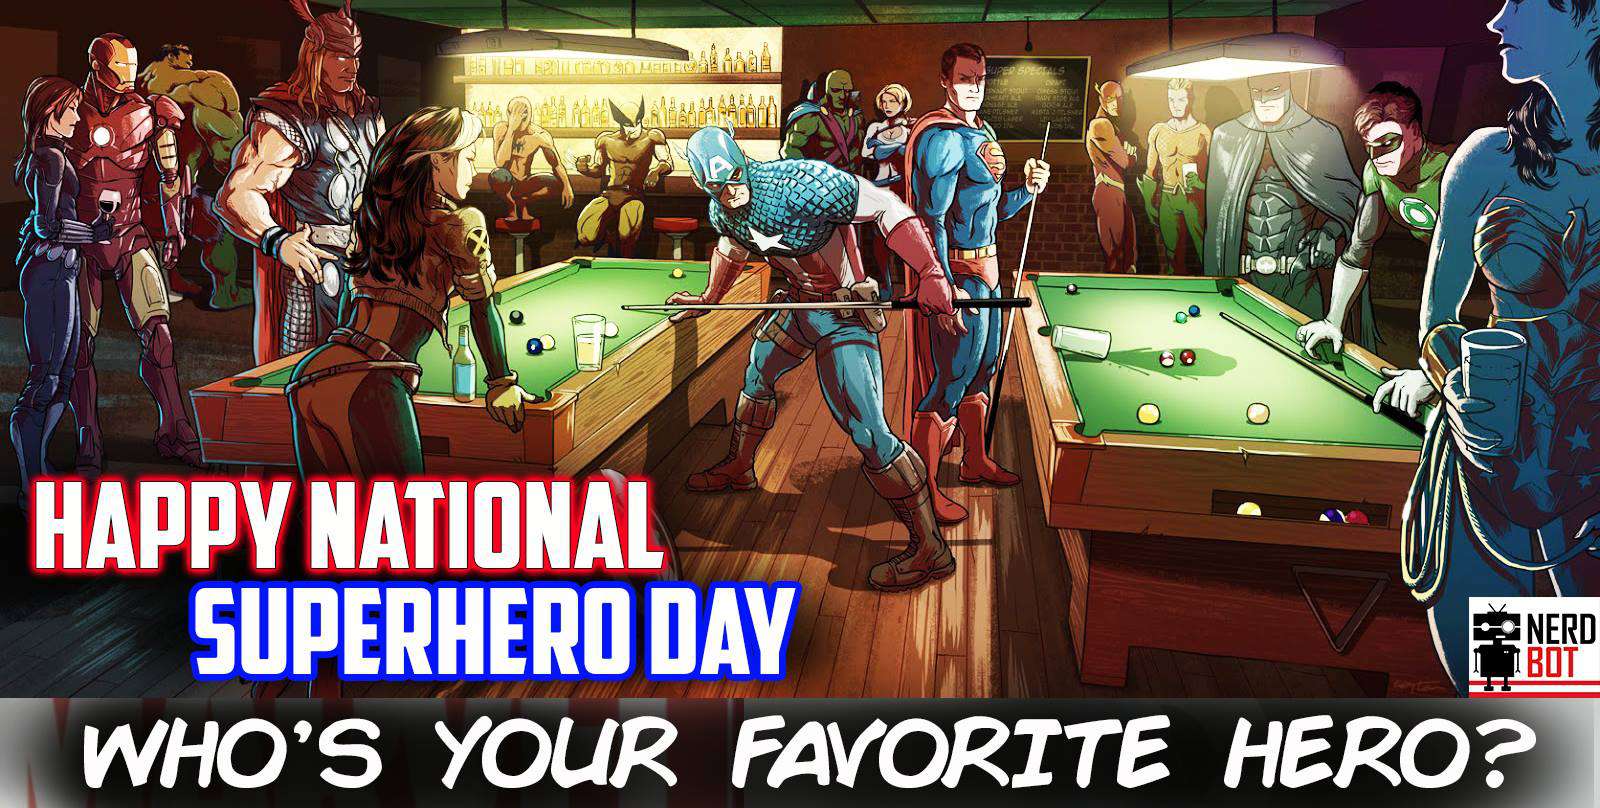 National Superhero Day Wishes pics free download